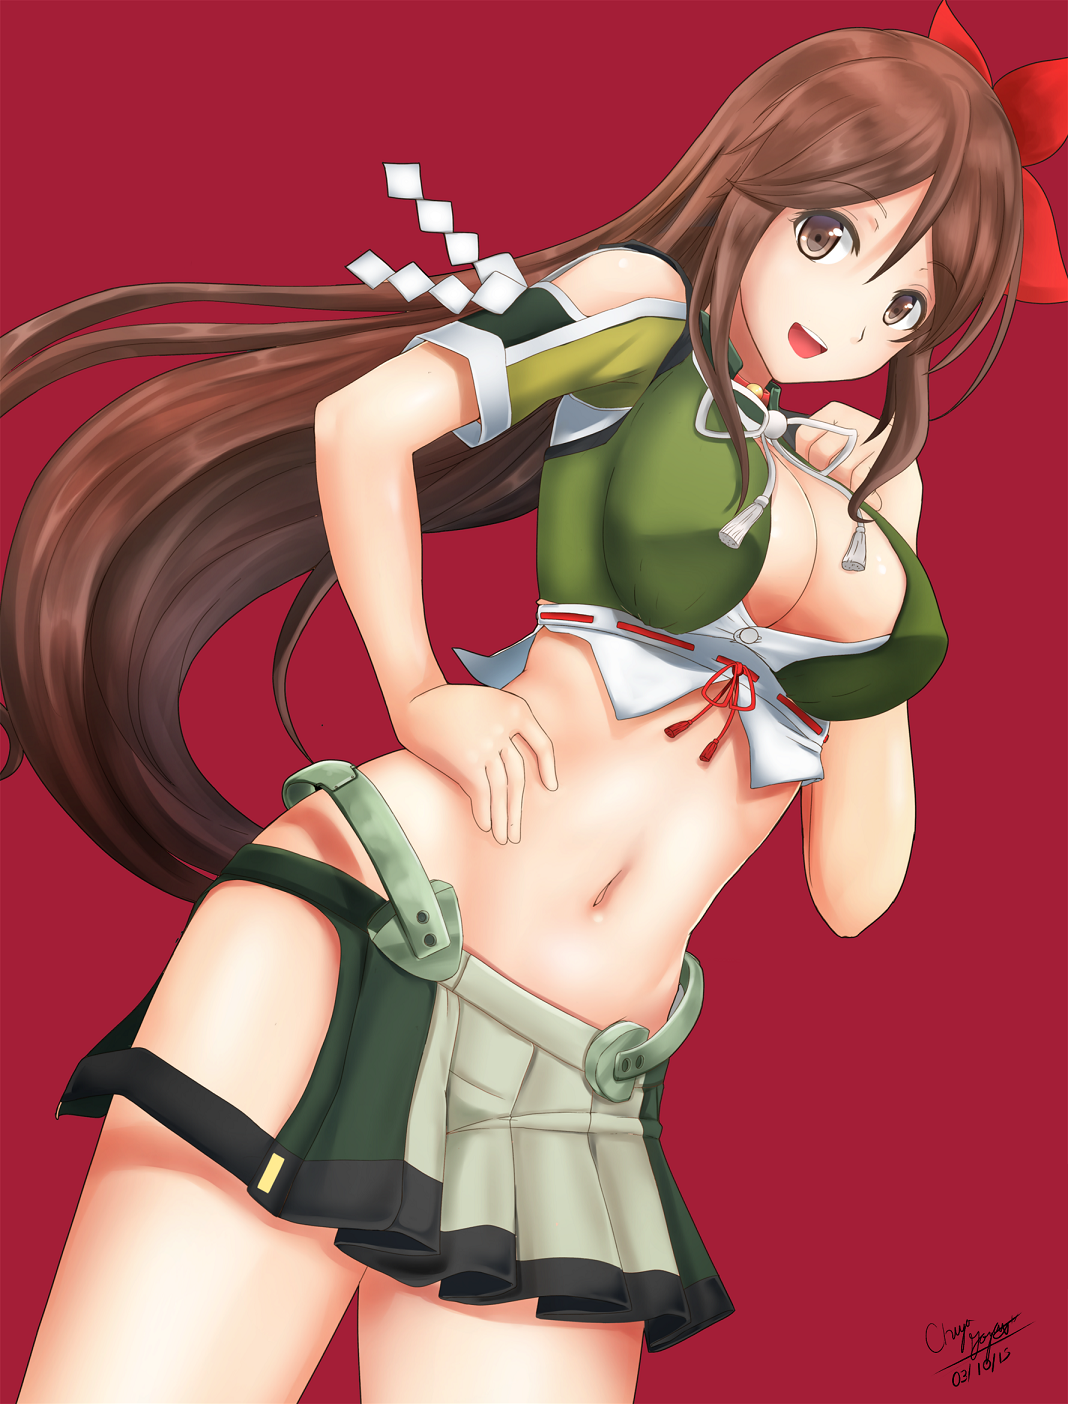 Anime 1068x1404 anime anime girls Amagi (Kancolle) Kantai Collection brown eyes long hair open shirt Pixiv red background simple background boobs big boobs curvy belly skirt open mouth hands on waist watermarked 2015 (Year)